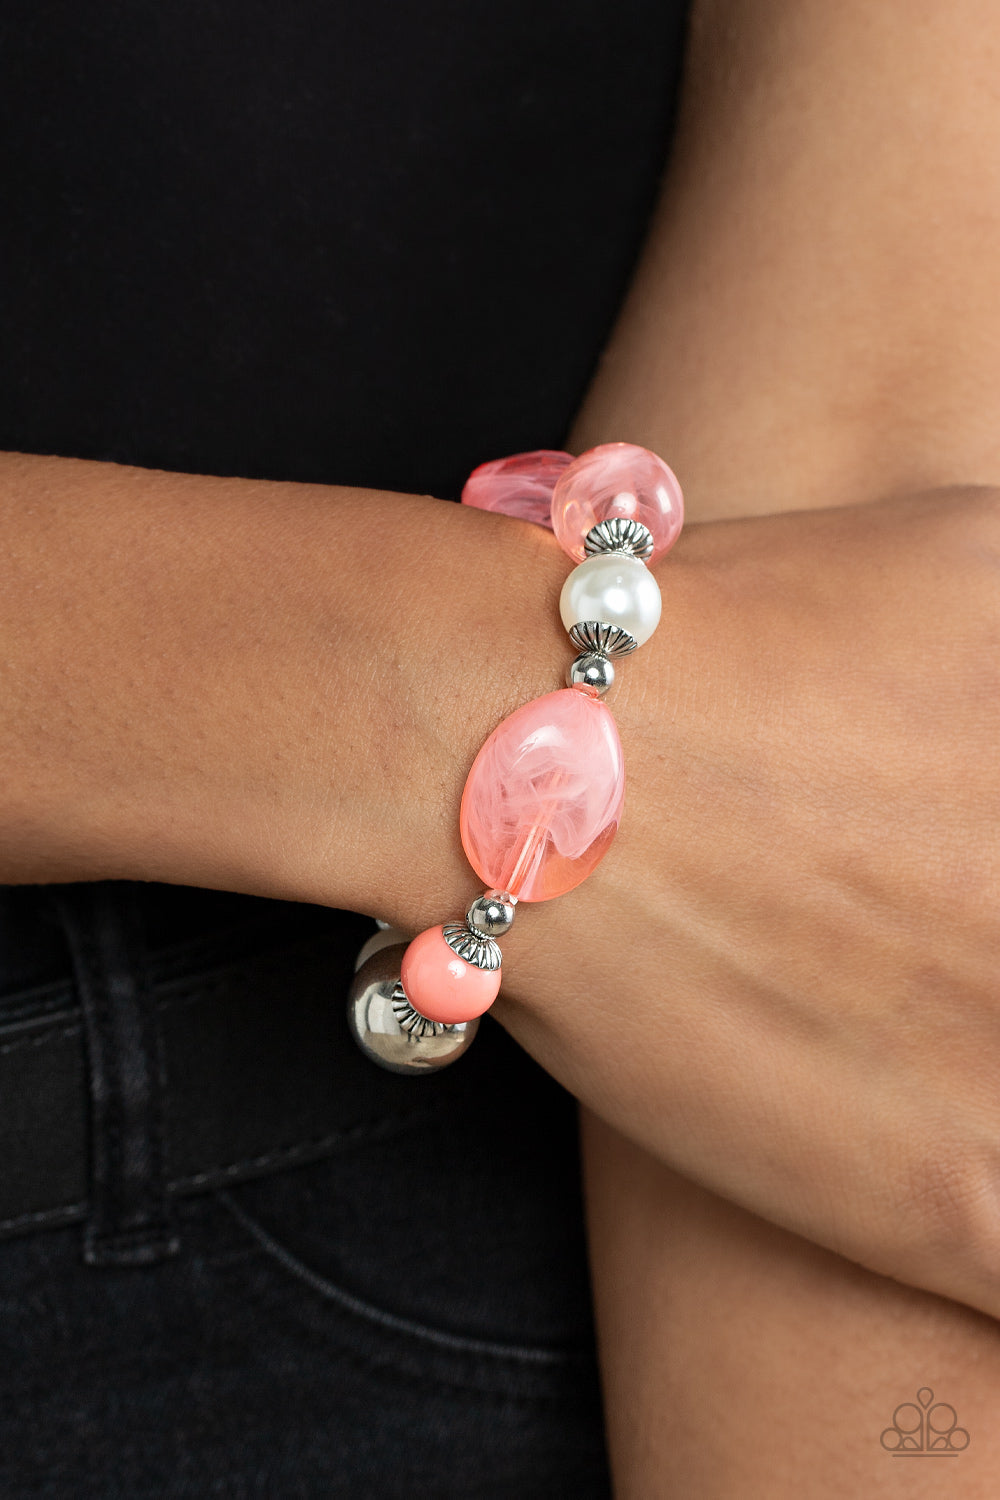 Resort Ritz - Coral Orange - Pearl Silver Bracelet - Paparazzi Accessories - Assortment of white pearls, silver accents, and glassy and acrylic coral beads are threaded along a stretchy band around the wrist for a refreshing colorful bracelet.